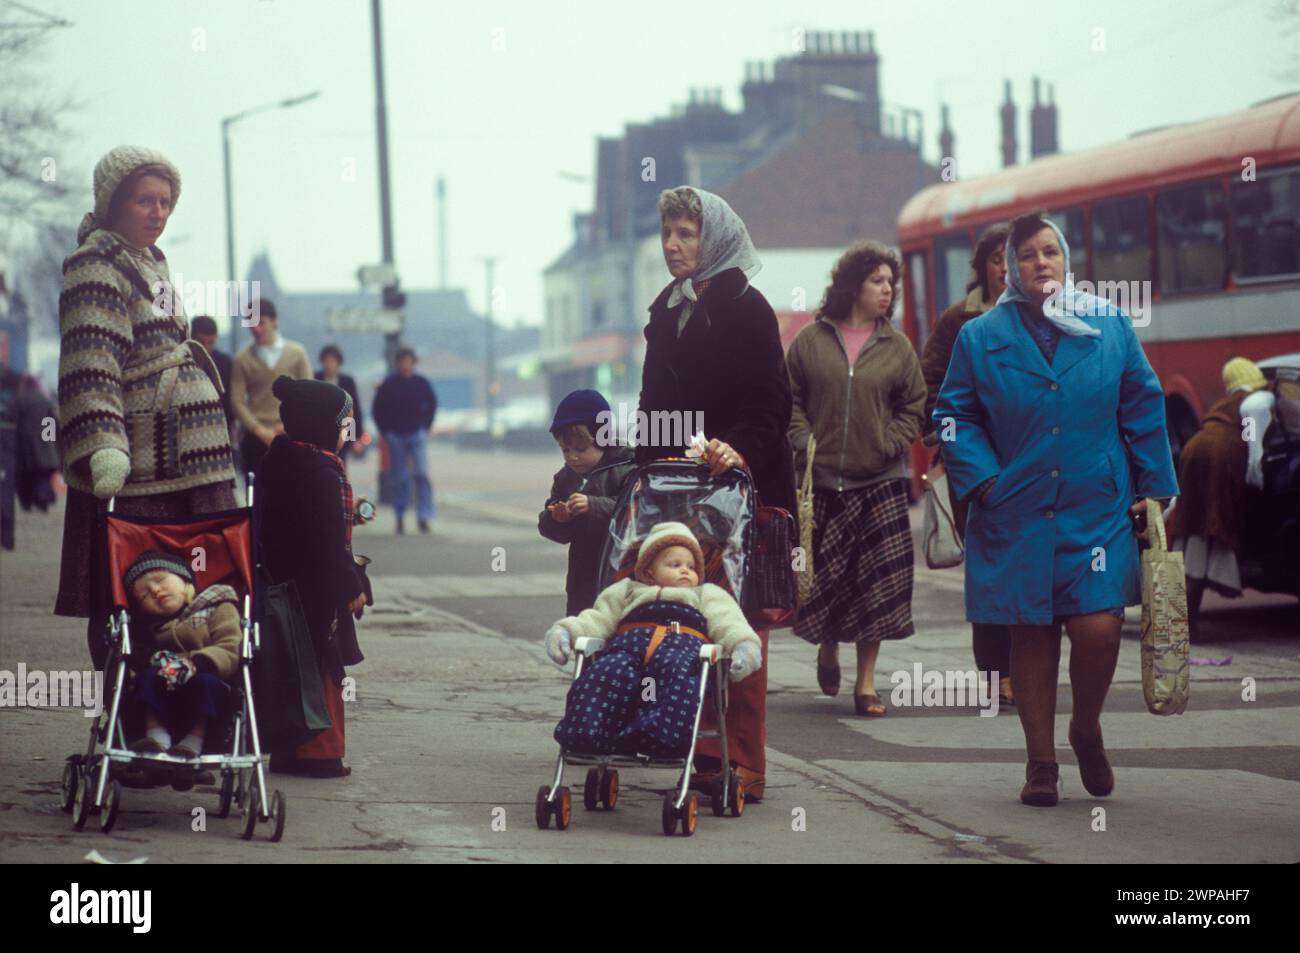 Working class 1980s UK. Local women pushing prams stop and chat in the Hessle Road area of town, which was a traditional working class enclave and home to fishermen and dock workers. Hull, Humberside, England 1980 HOMER SYKES Stock Photo